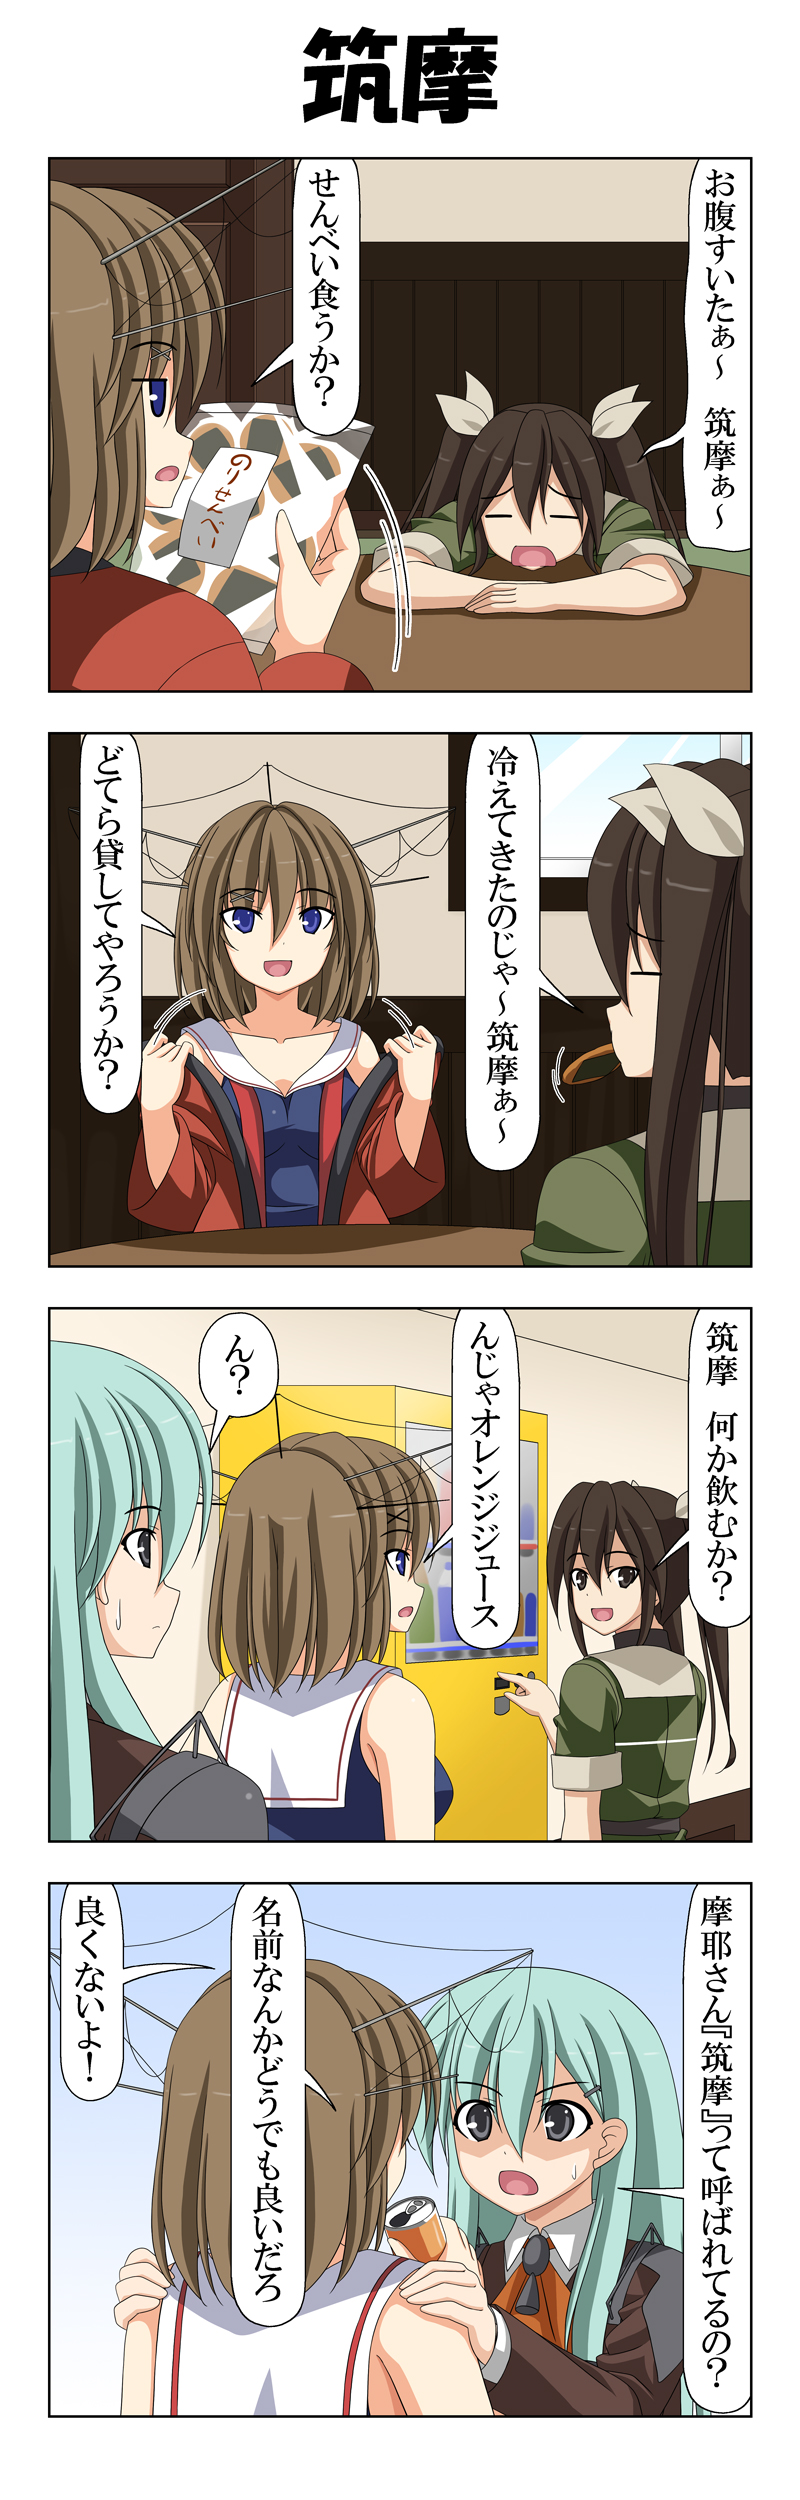 3girls 4koma absurdres aqua_hair ascot black_hair blue_eyes brown_eyes can closed_eyes comic commentary_request door eyebrows_visible_through_hair green_eyes hair_between_eyes hair_ornament hair_ribbon hairclip hands_on_another's_shoulders hanten headgear highres jacket japanese_clothes kantai_collection long_hair long_sleeves maya_(kantai_collection) multiple_girls open_mouth rappa_(rappaya) ribbon school_uniform shaded_face short_sleeves sleeveless smile soda_can suzuya_(kantai_collection) sweatdrop table tone_(kantai_collection) translation_request twintails vending_machine